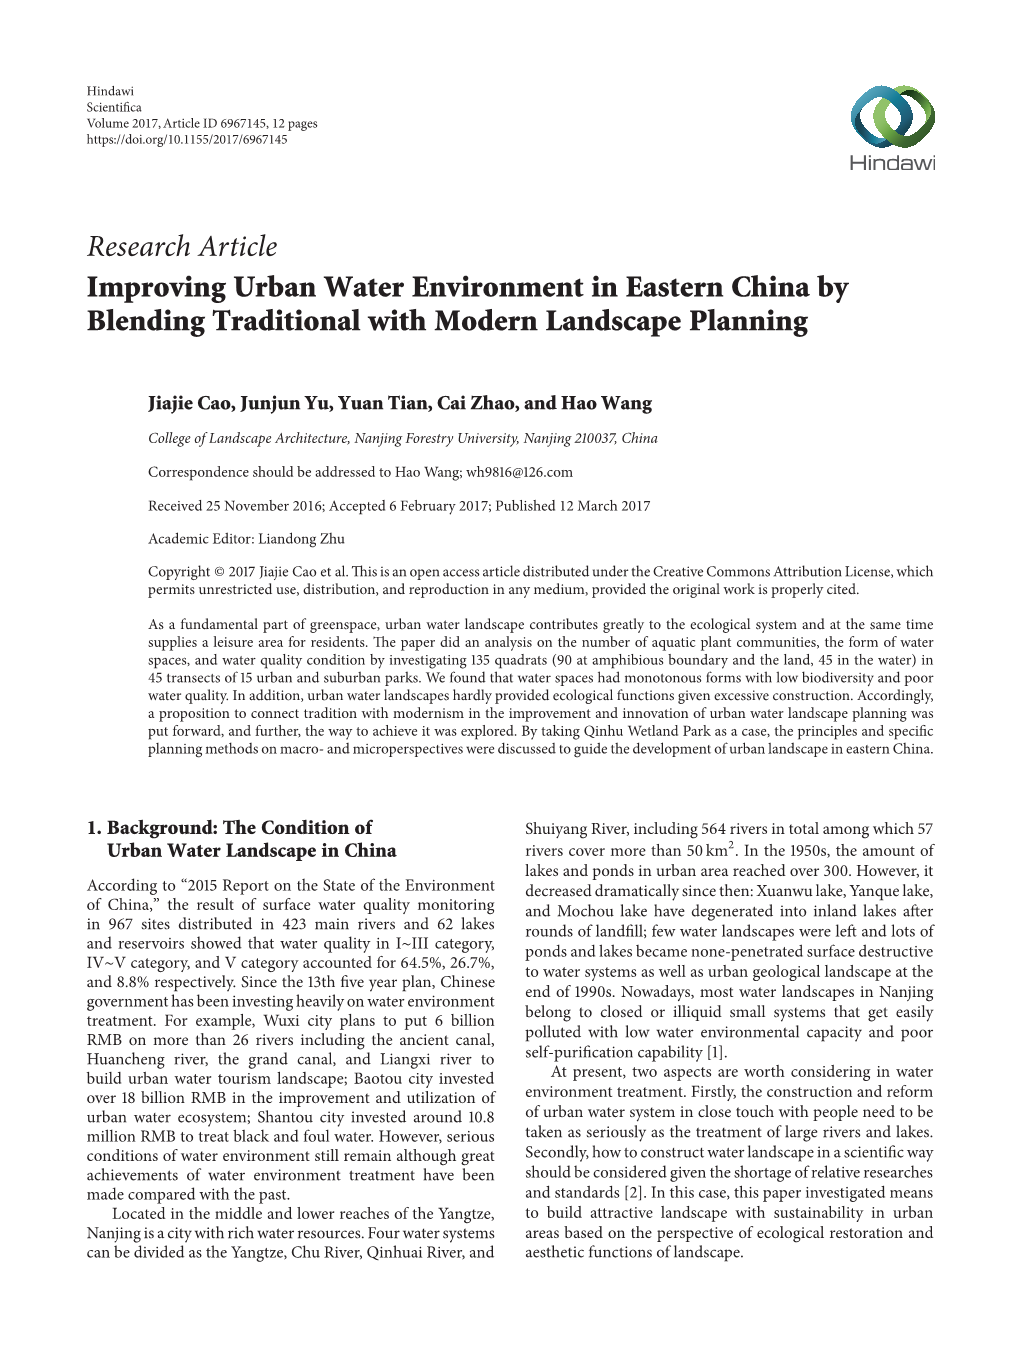 Improving Urban Water Environment in Eastern China by Blending Traditional with Modern Landscape Planning